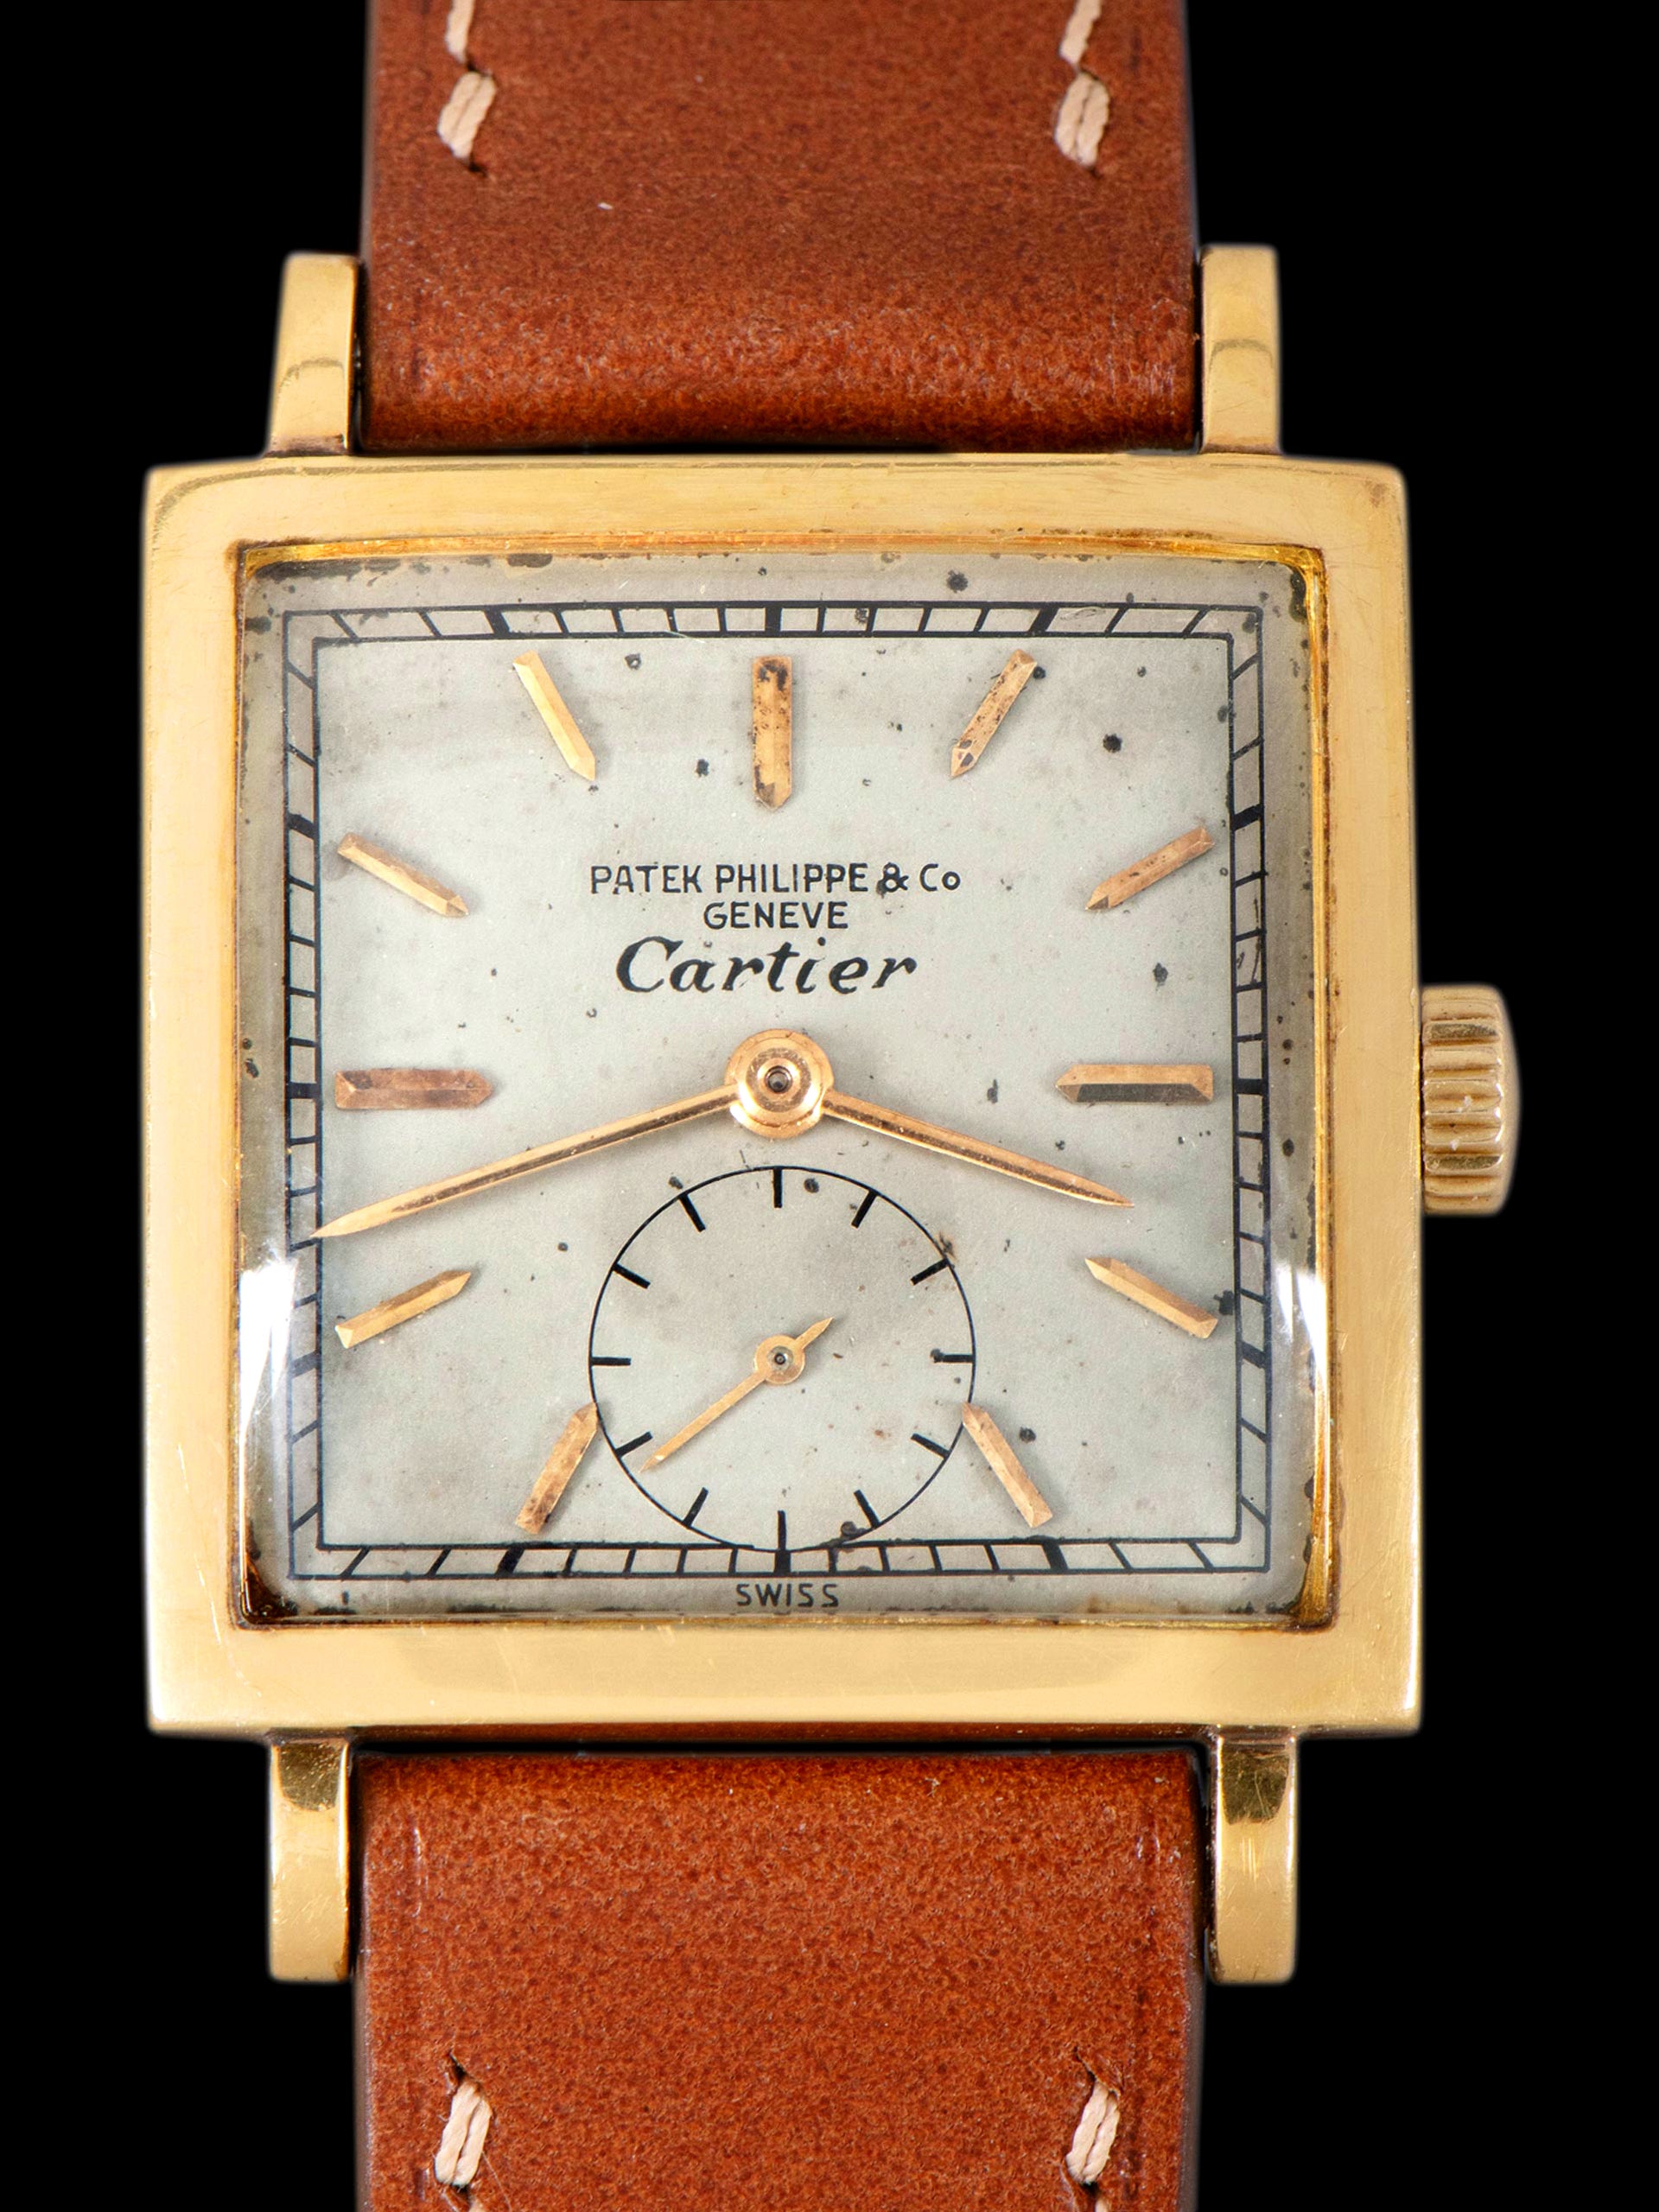 1942 Patek Philippe Square Dress Watch 18K YG (Ref. 1431) Retailed by Cartier w/ Extract from The Archives